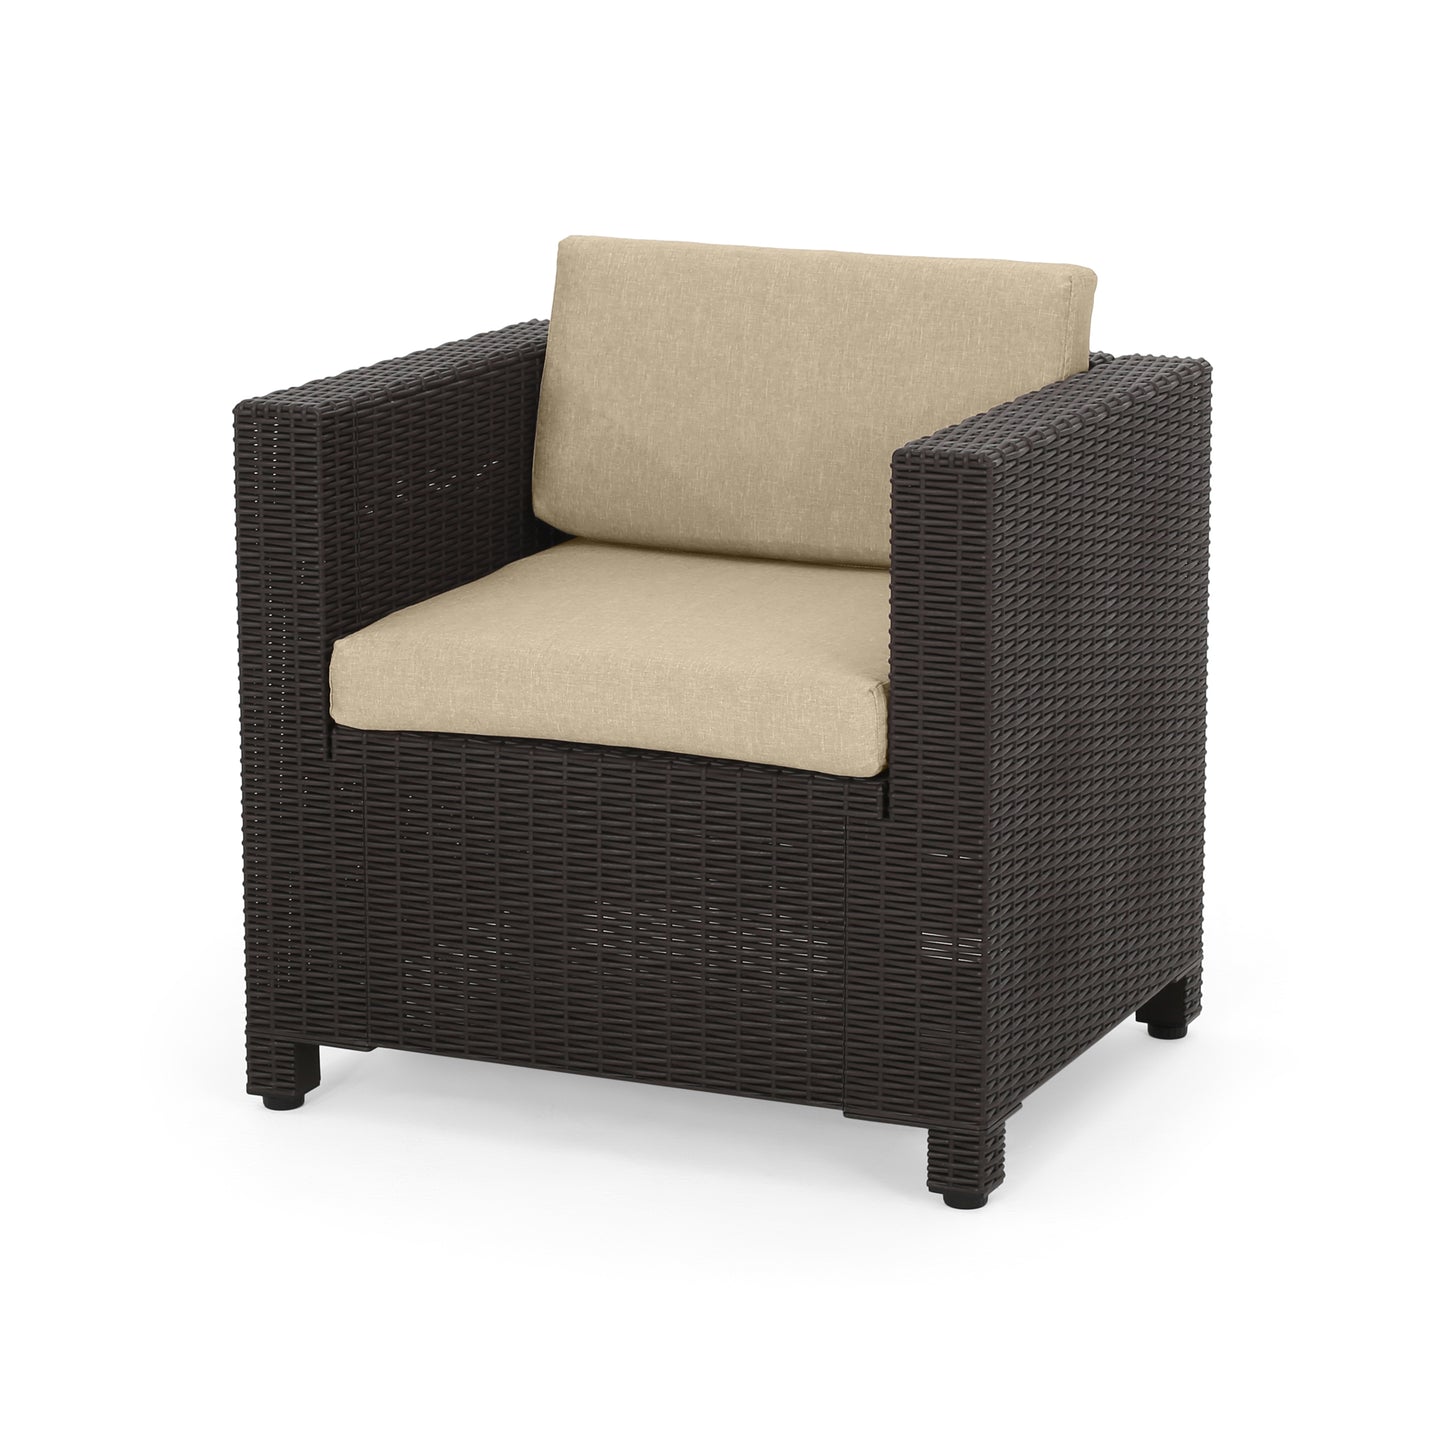 Farirra Outdoor Faux Wicker 8 Seater Chat Set with Cushions